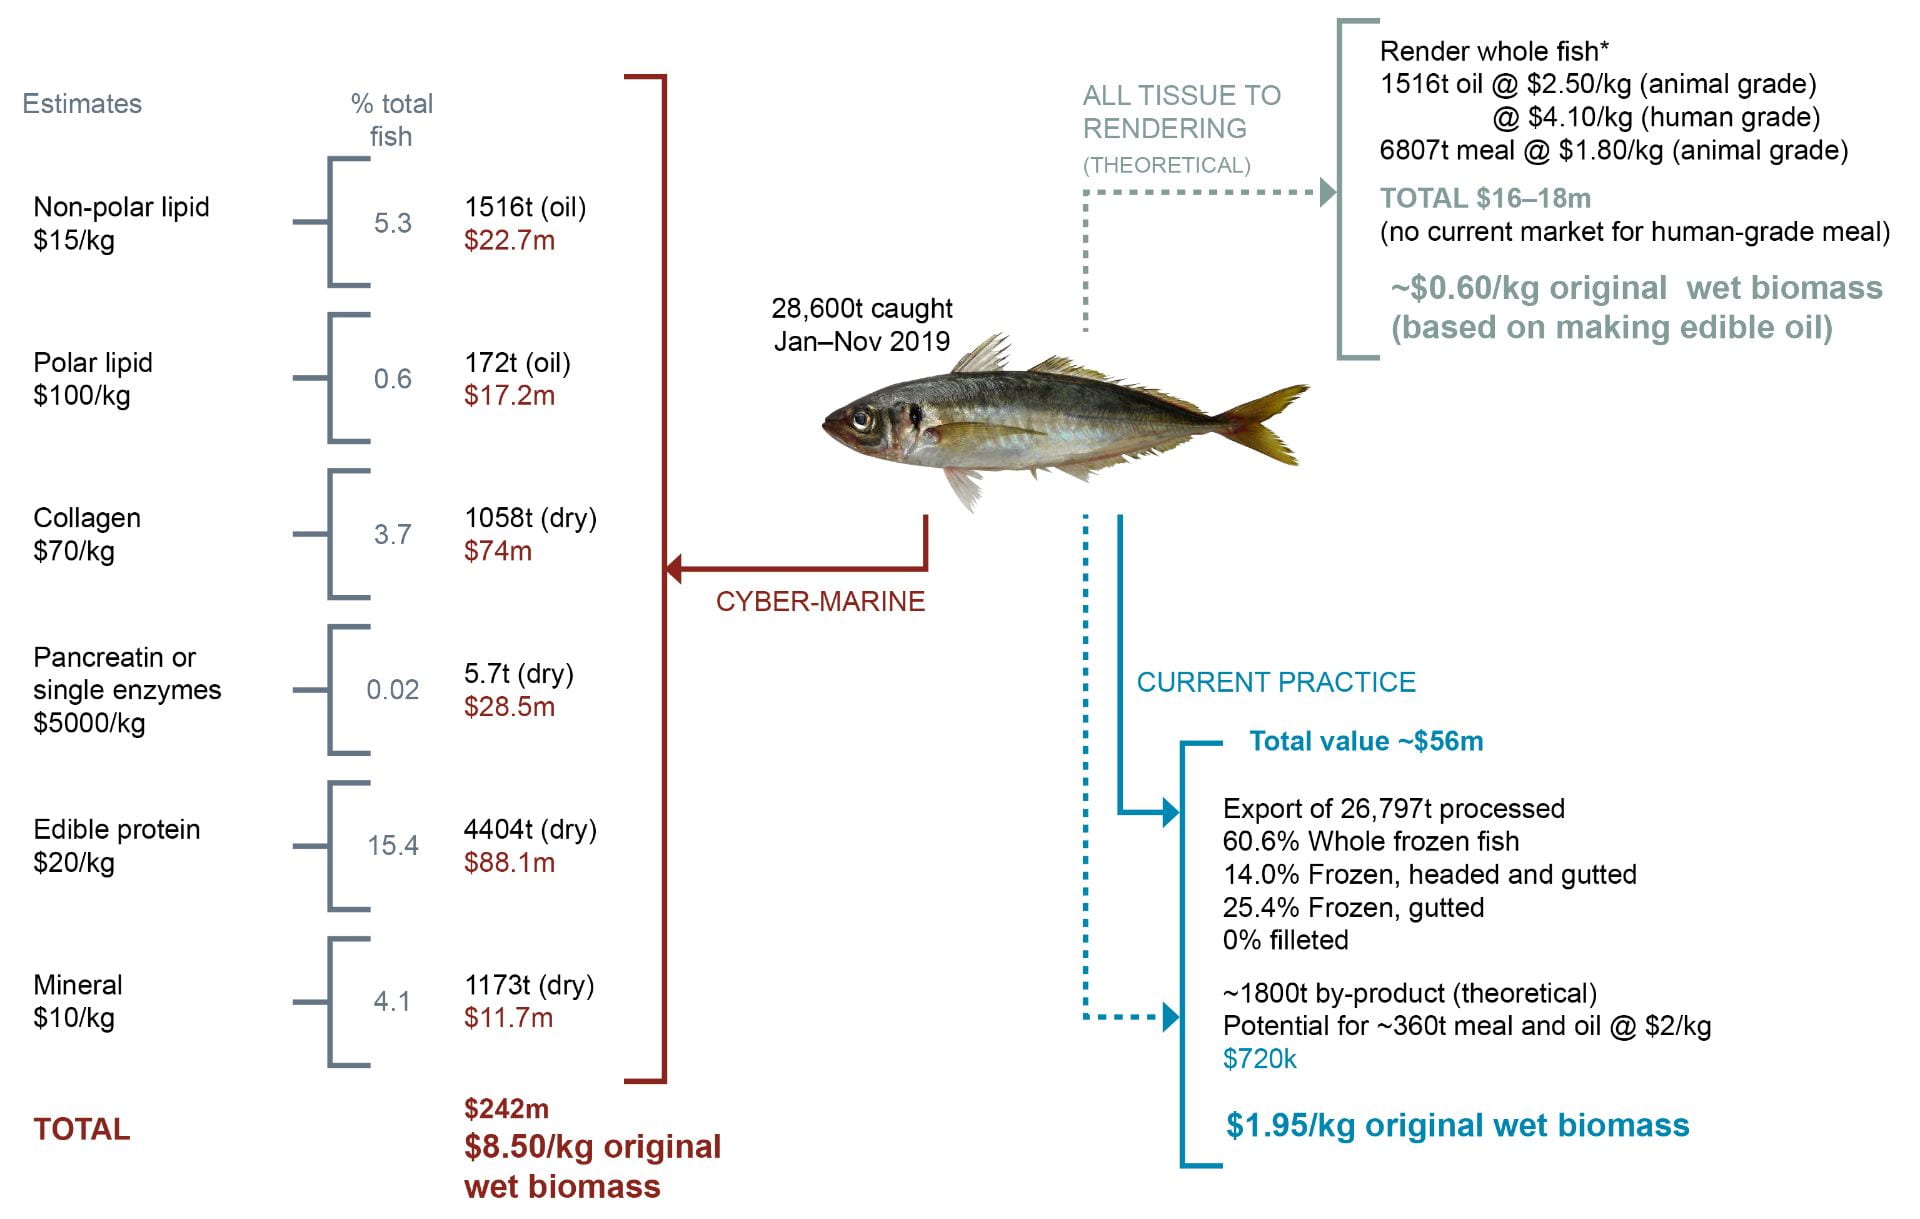 Potential to increase the value of jack mackerel through higher value by-products